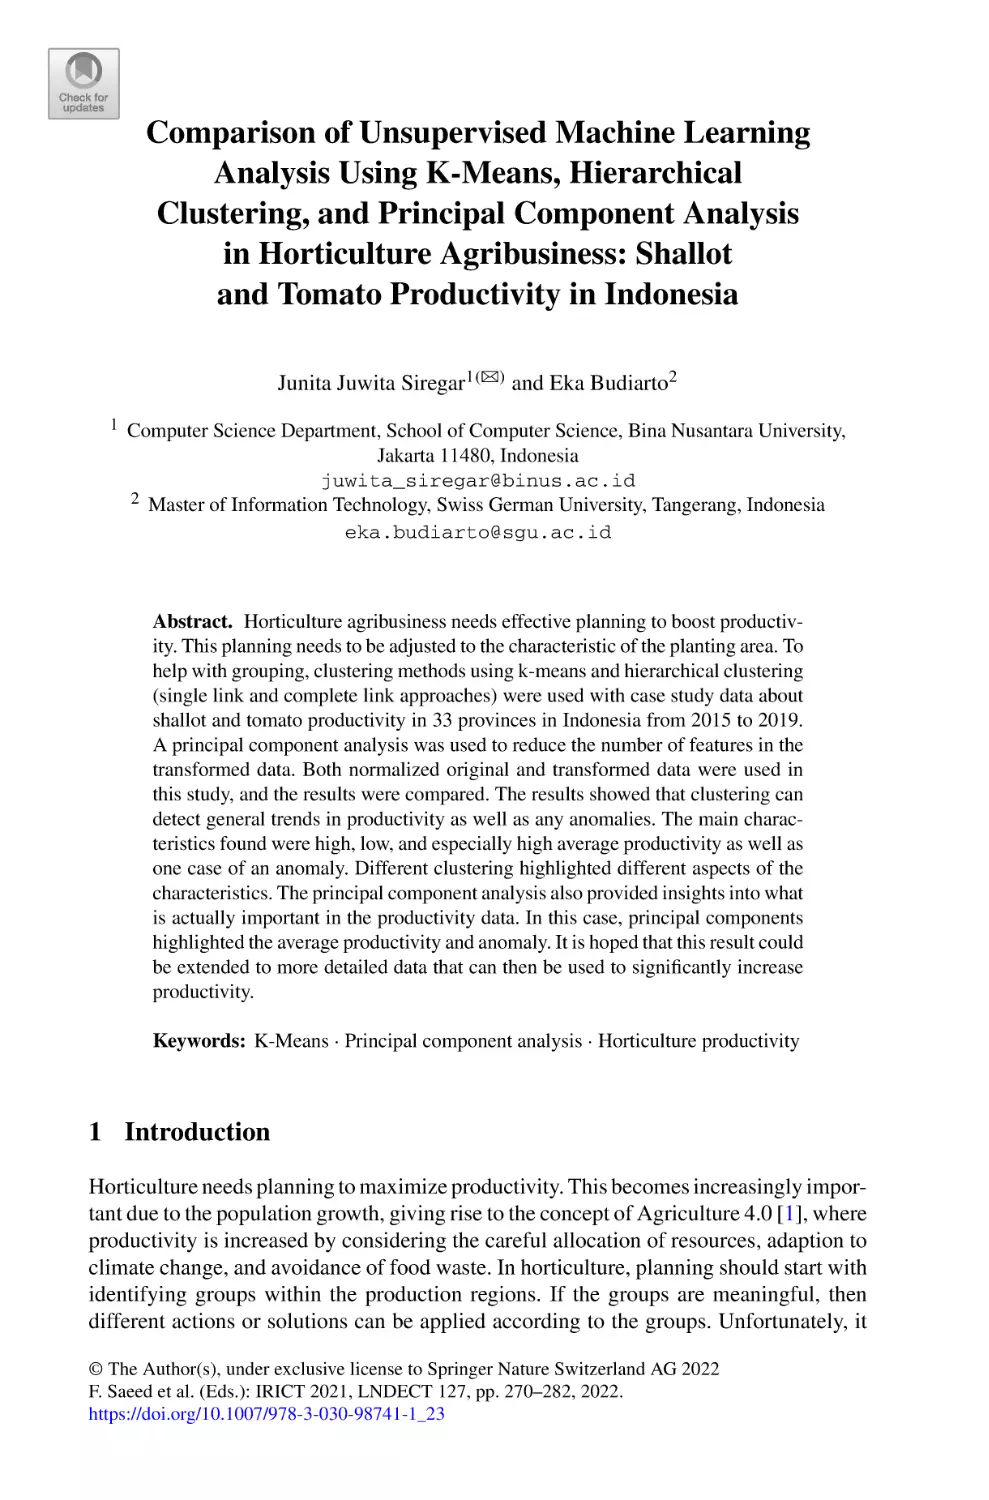 Comparison of Unsupervised Machine Learning Analysis Using K-Means, Hierarchical Clustering, and Principal Component Analysis in Horticulture Agribusiness
1 Introduction